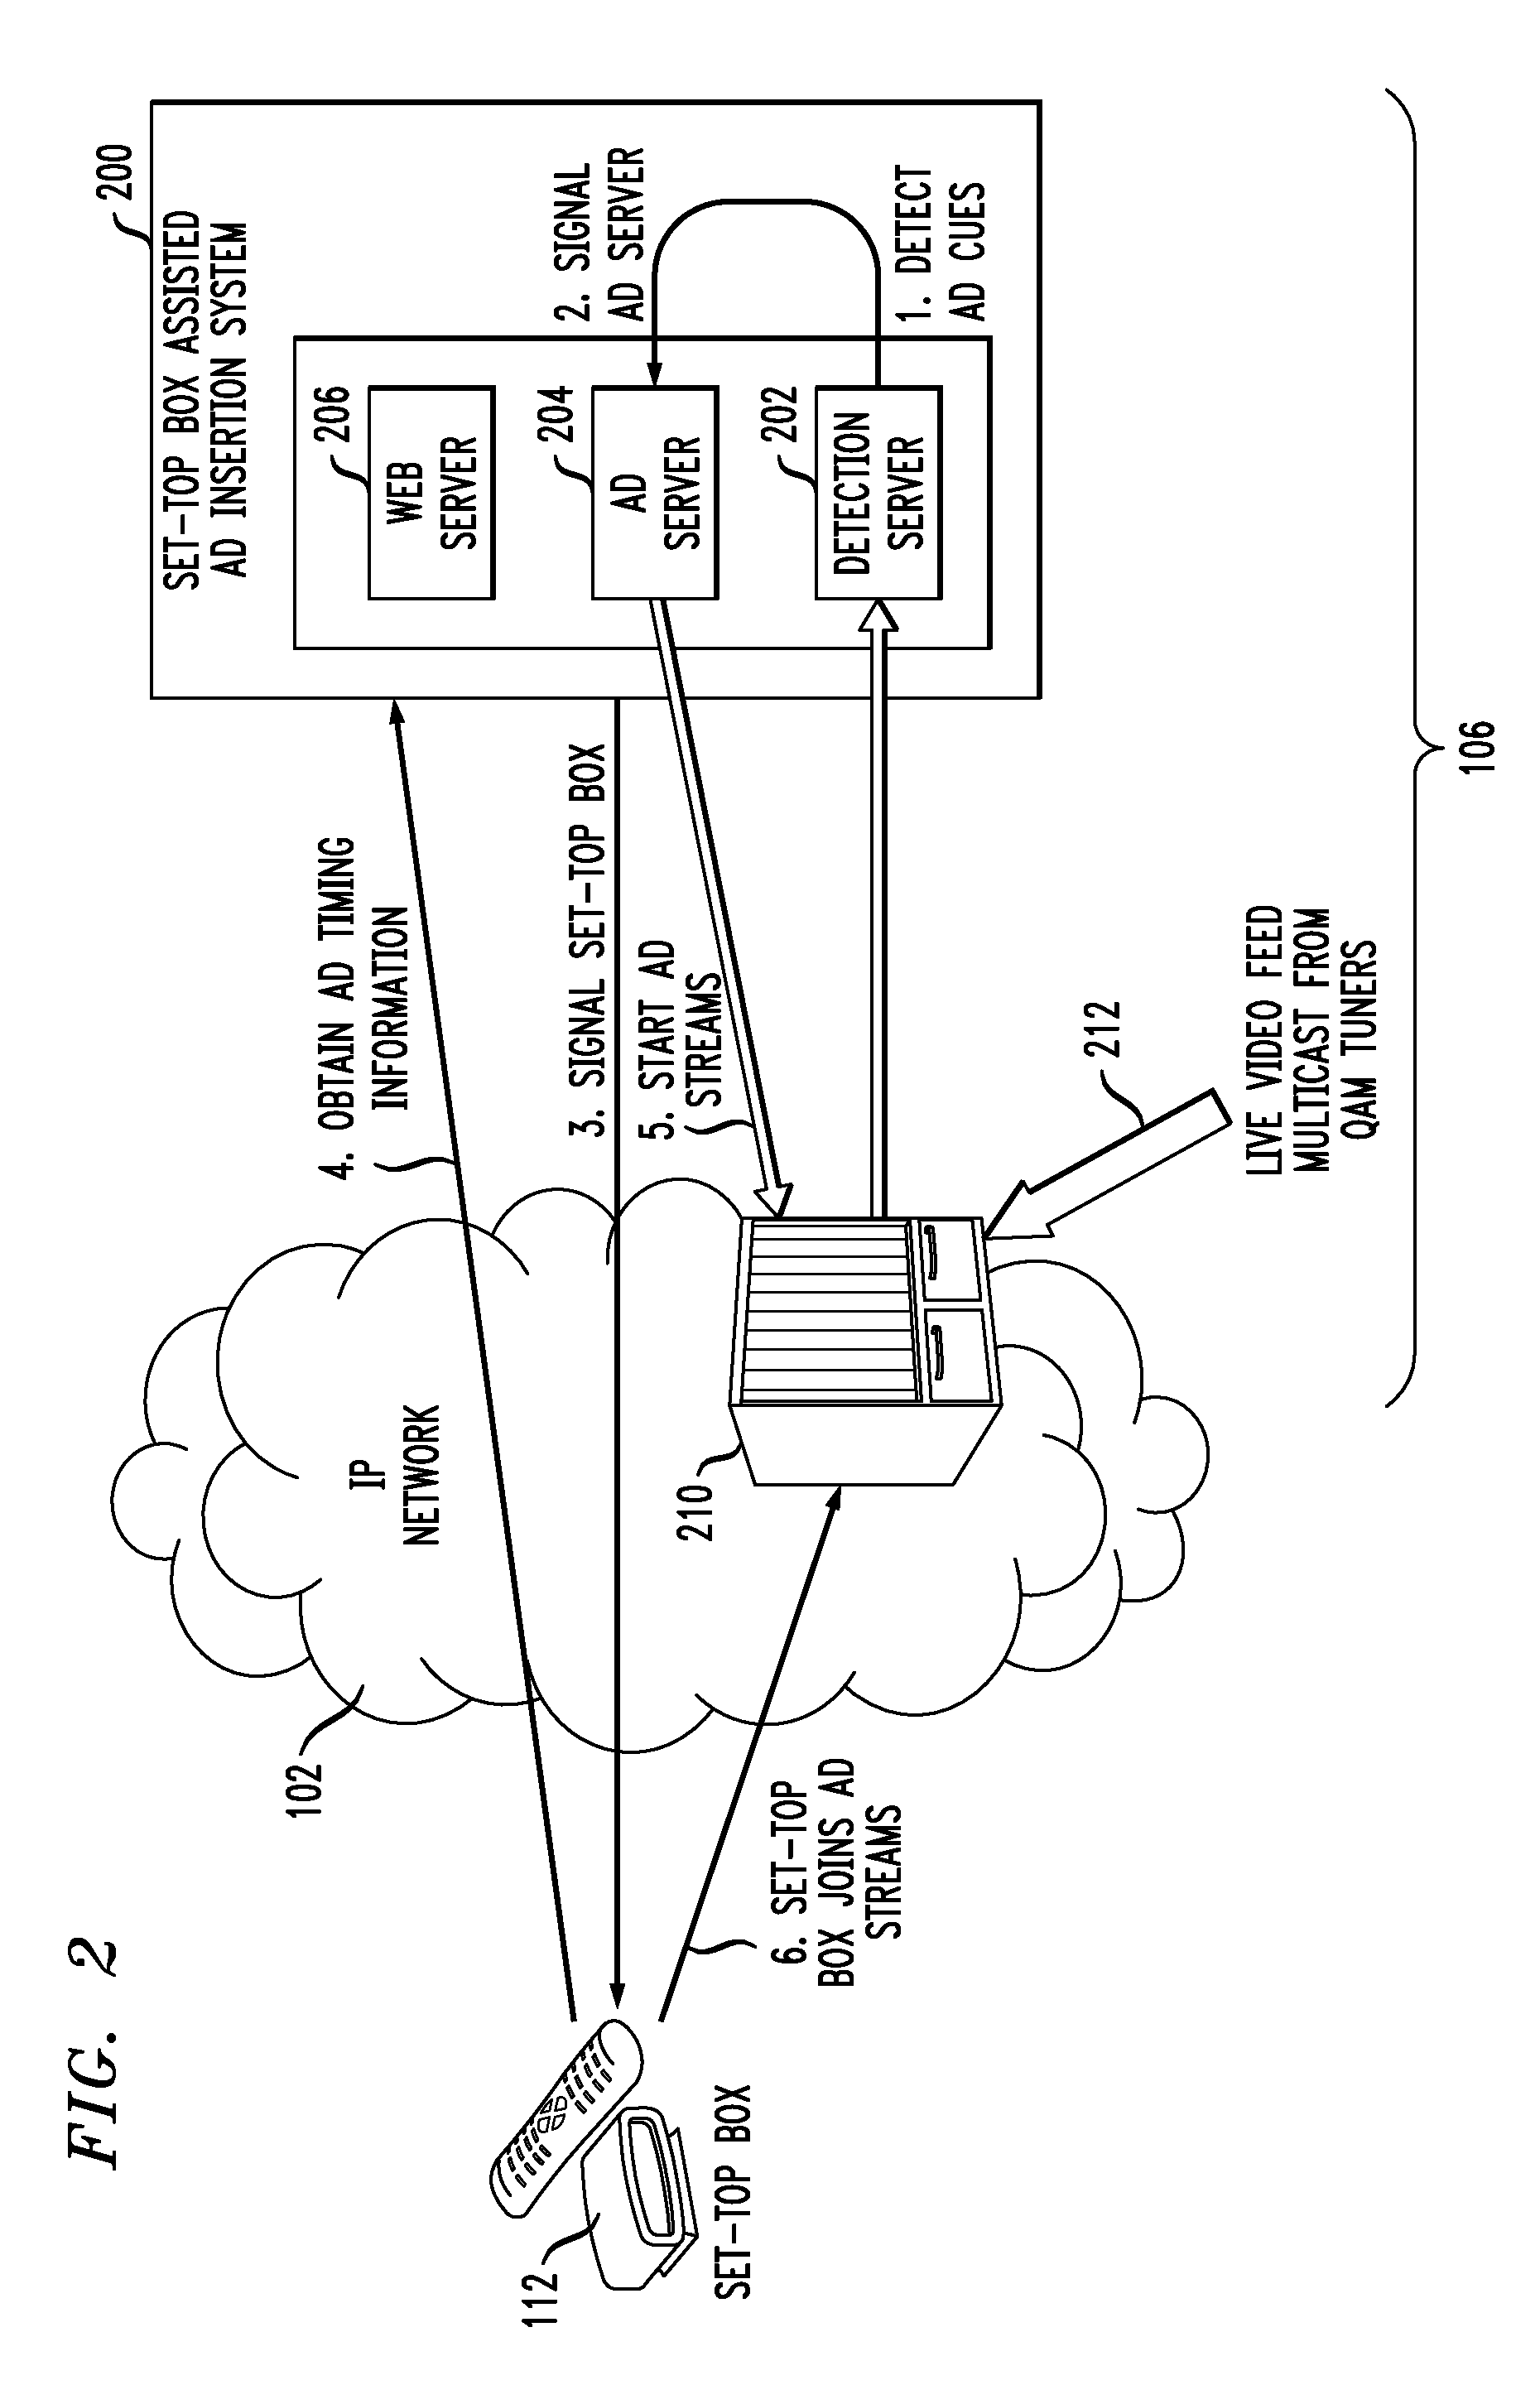 Targeted Advertisement Insertion with Interface Device Assisted Switching